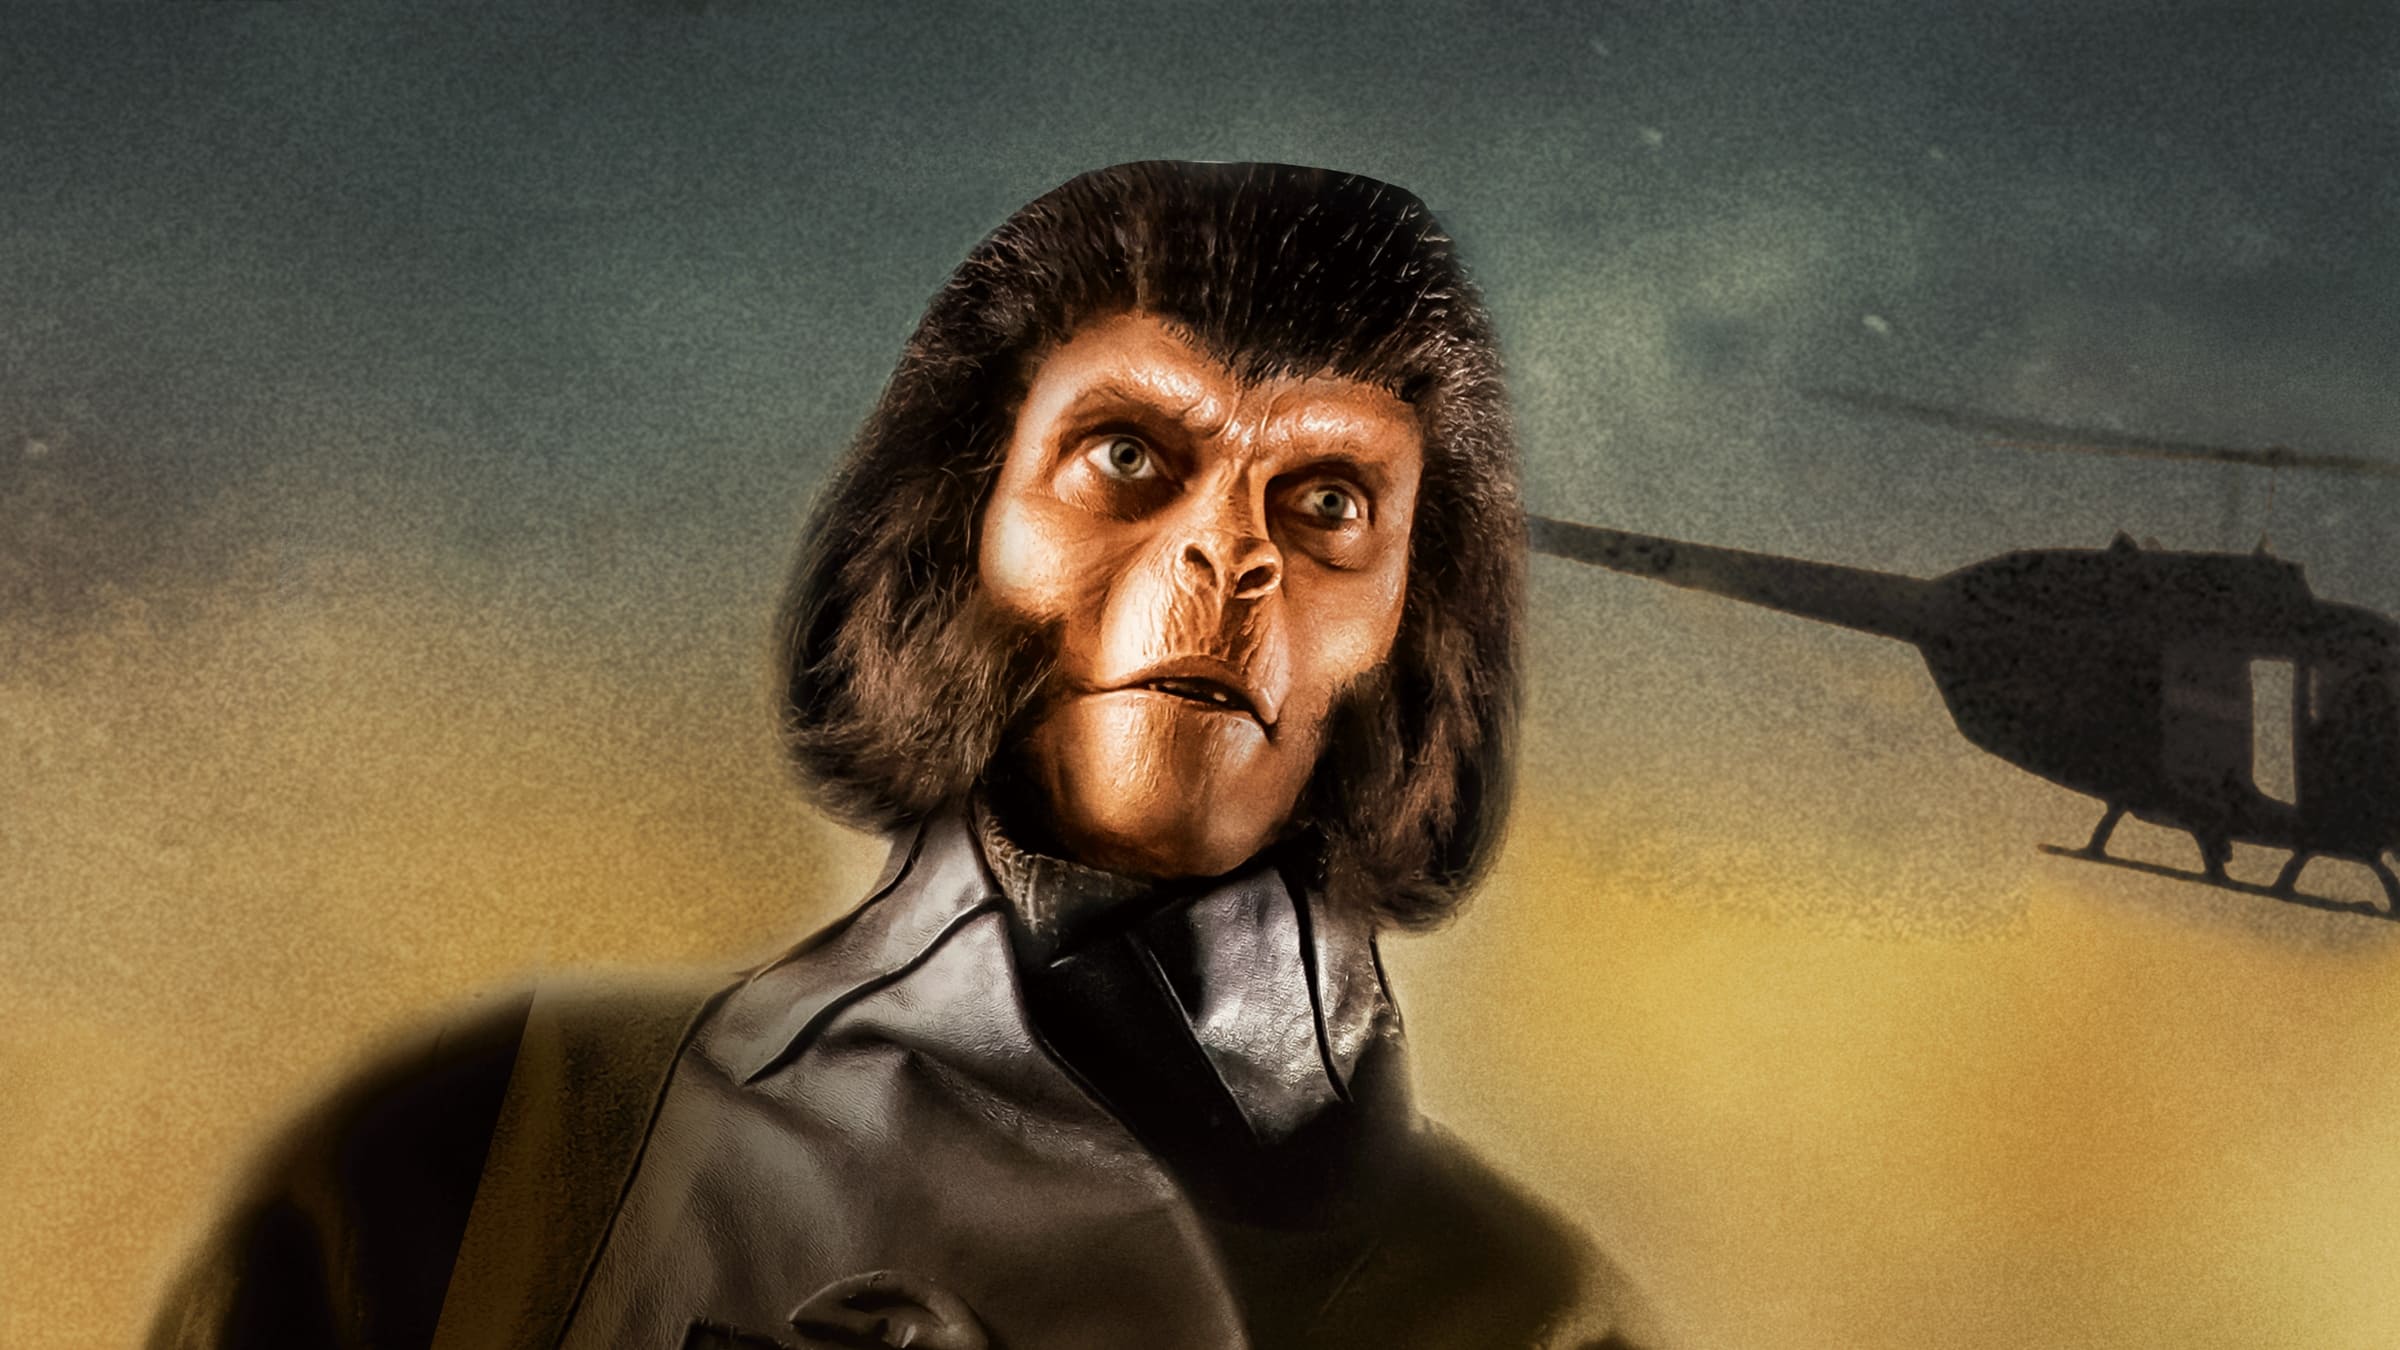 Tapeta filmu Útěk z Planety opic / Escape from the Planet of the Apes (1971)